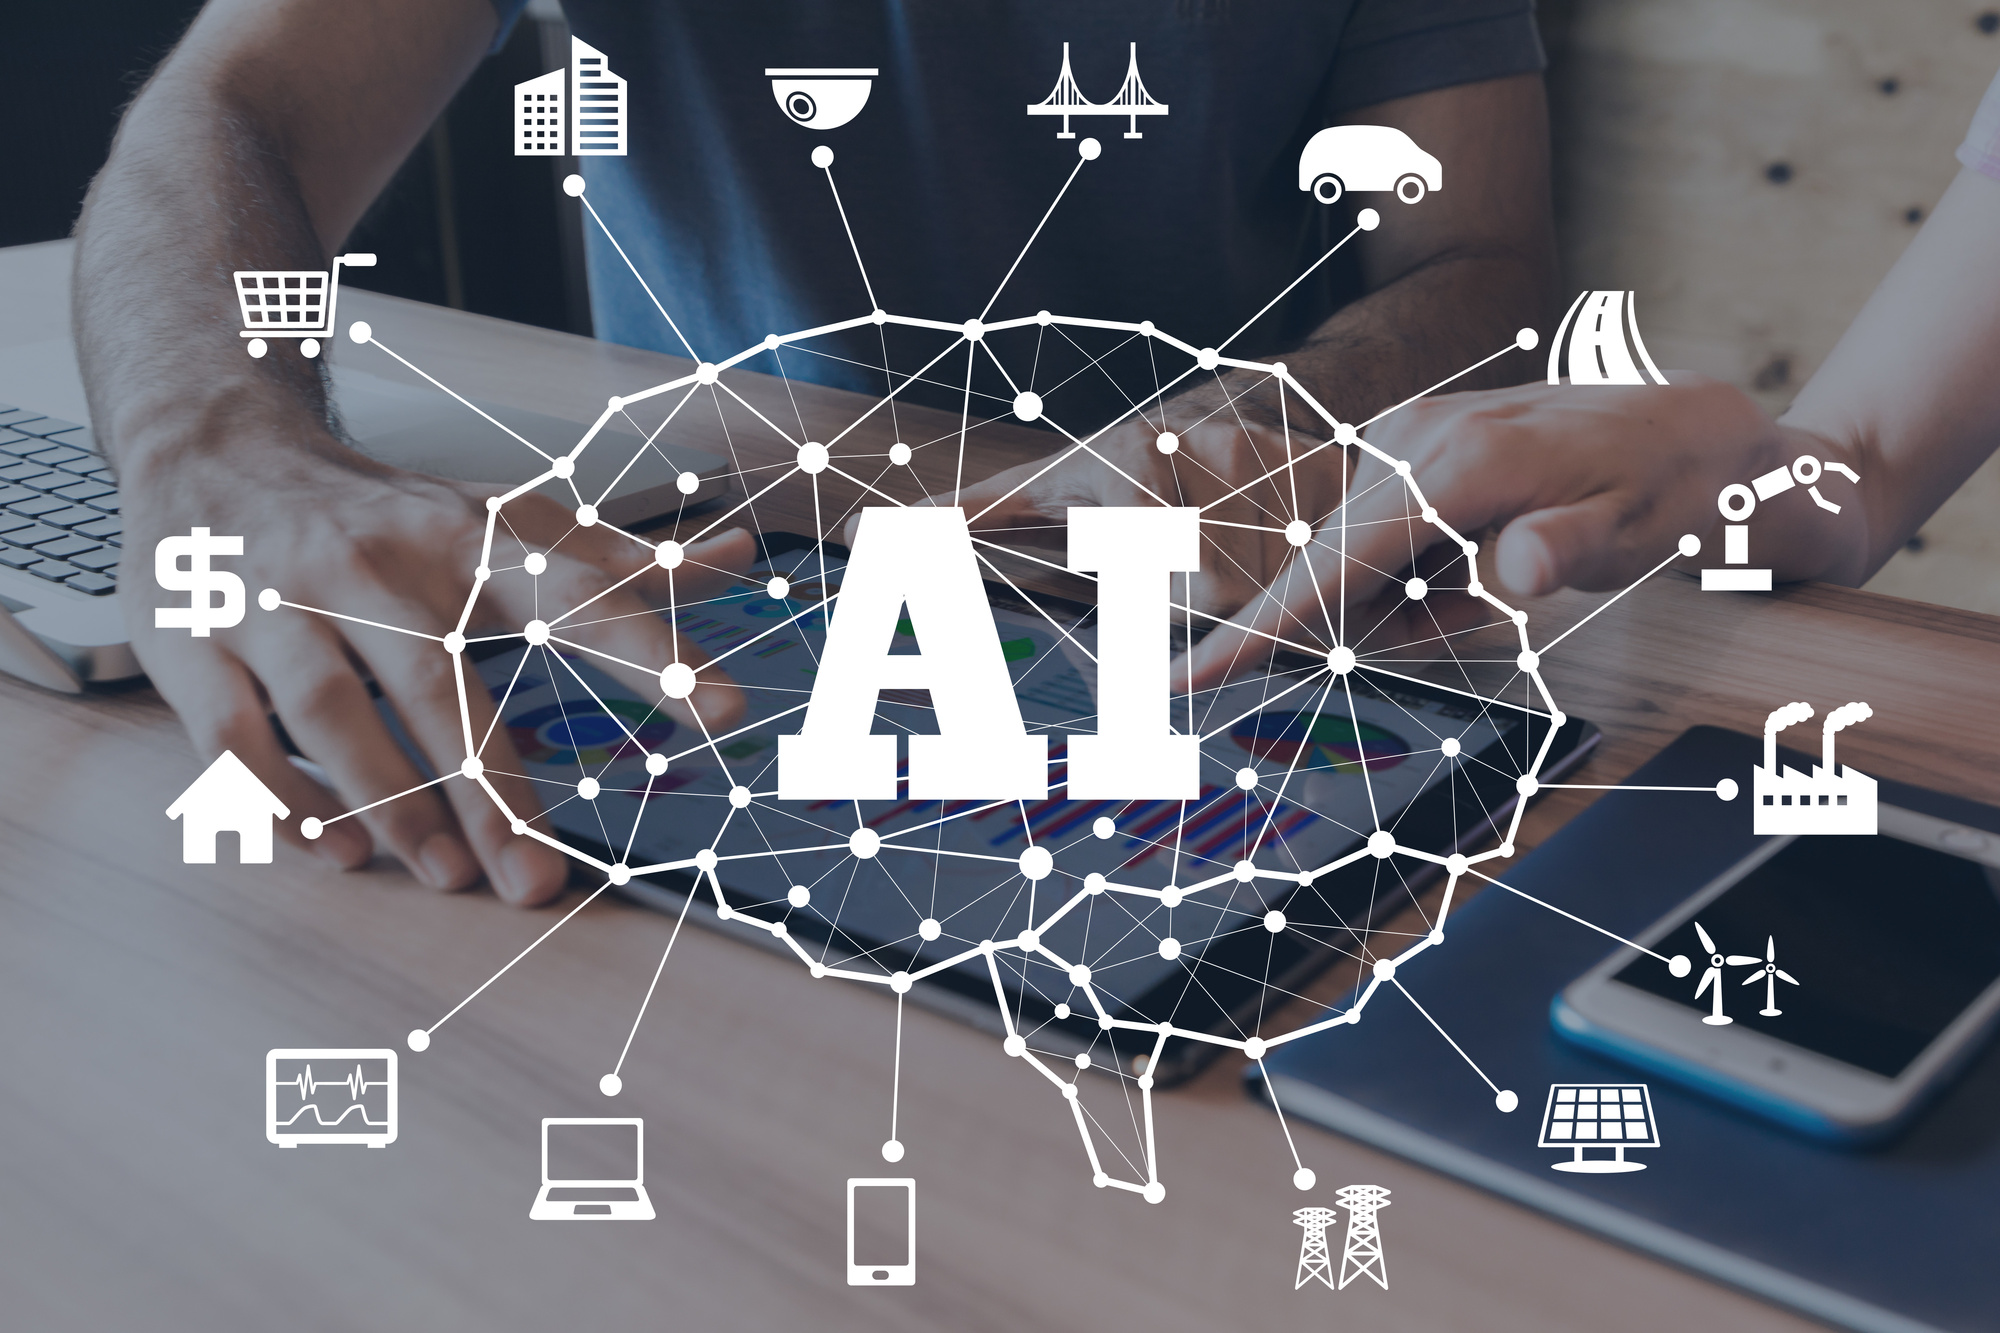 AI In Marketing - Using AI Can Help Marketers Reach Their Customers